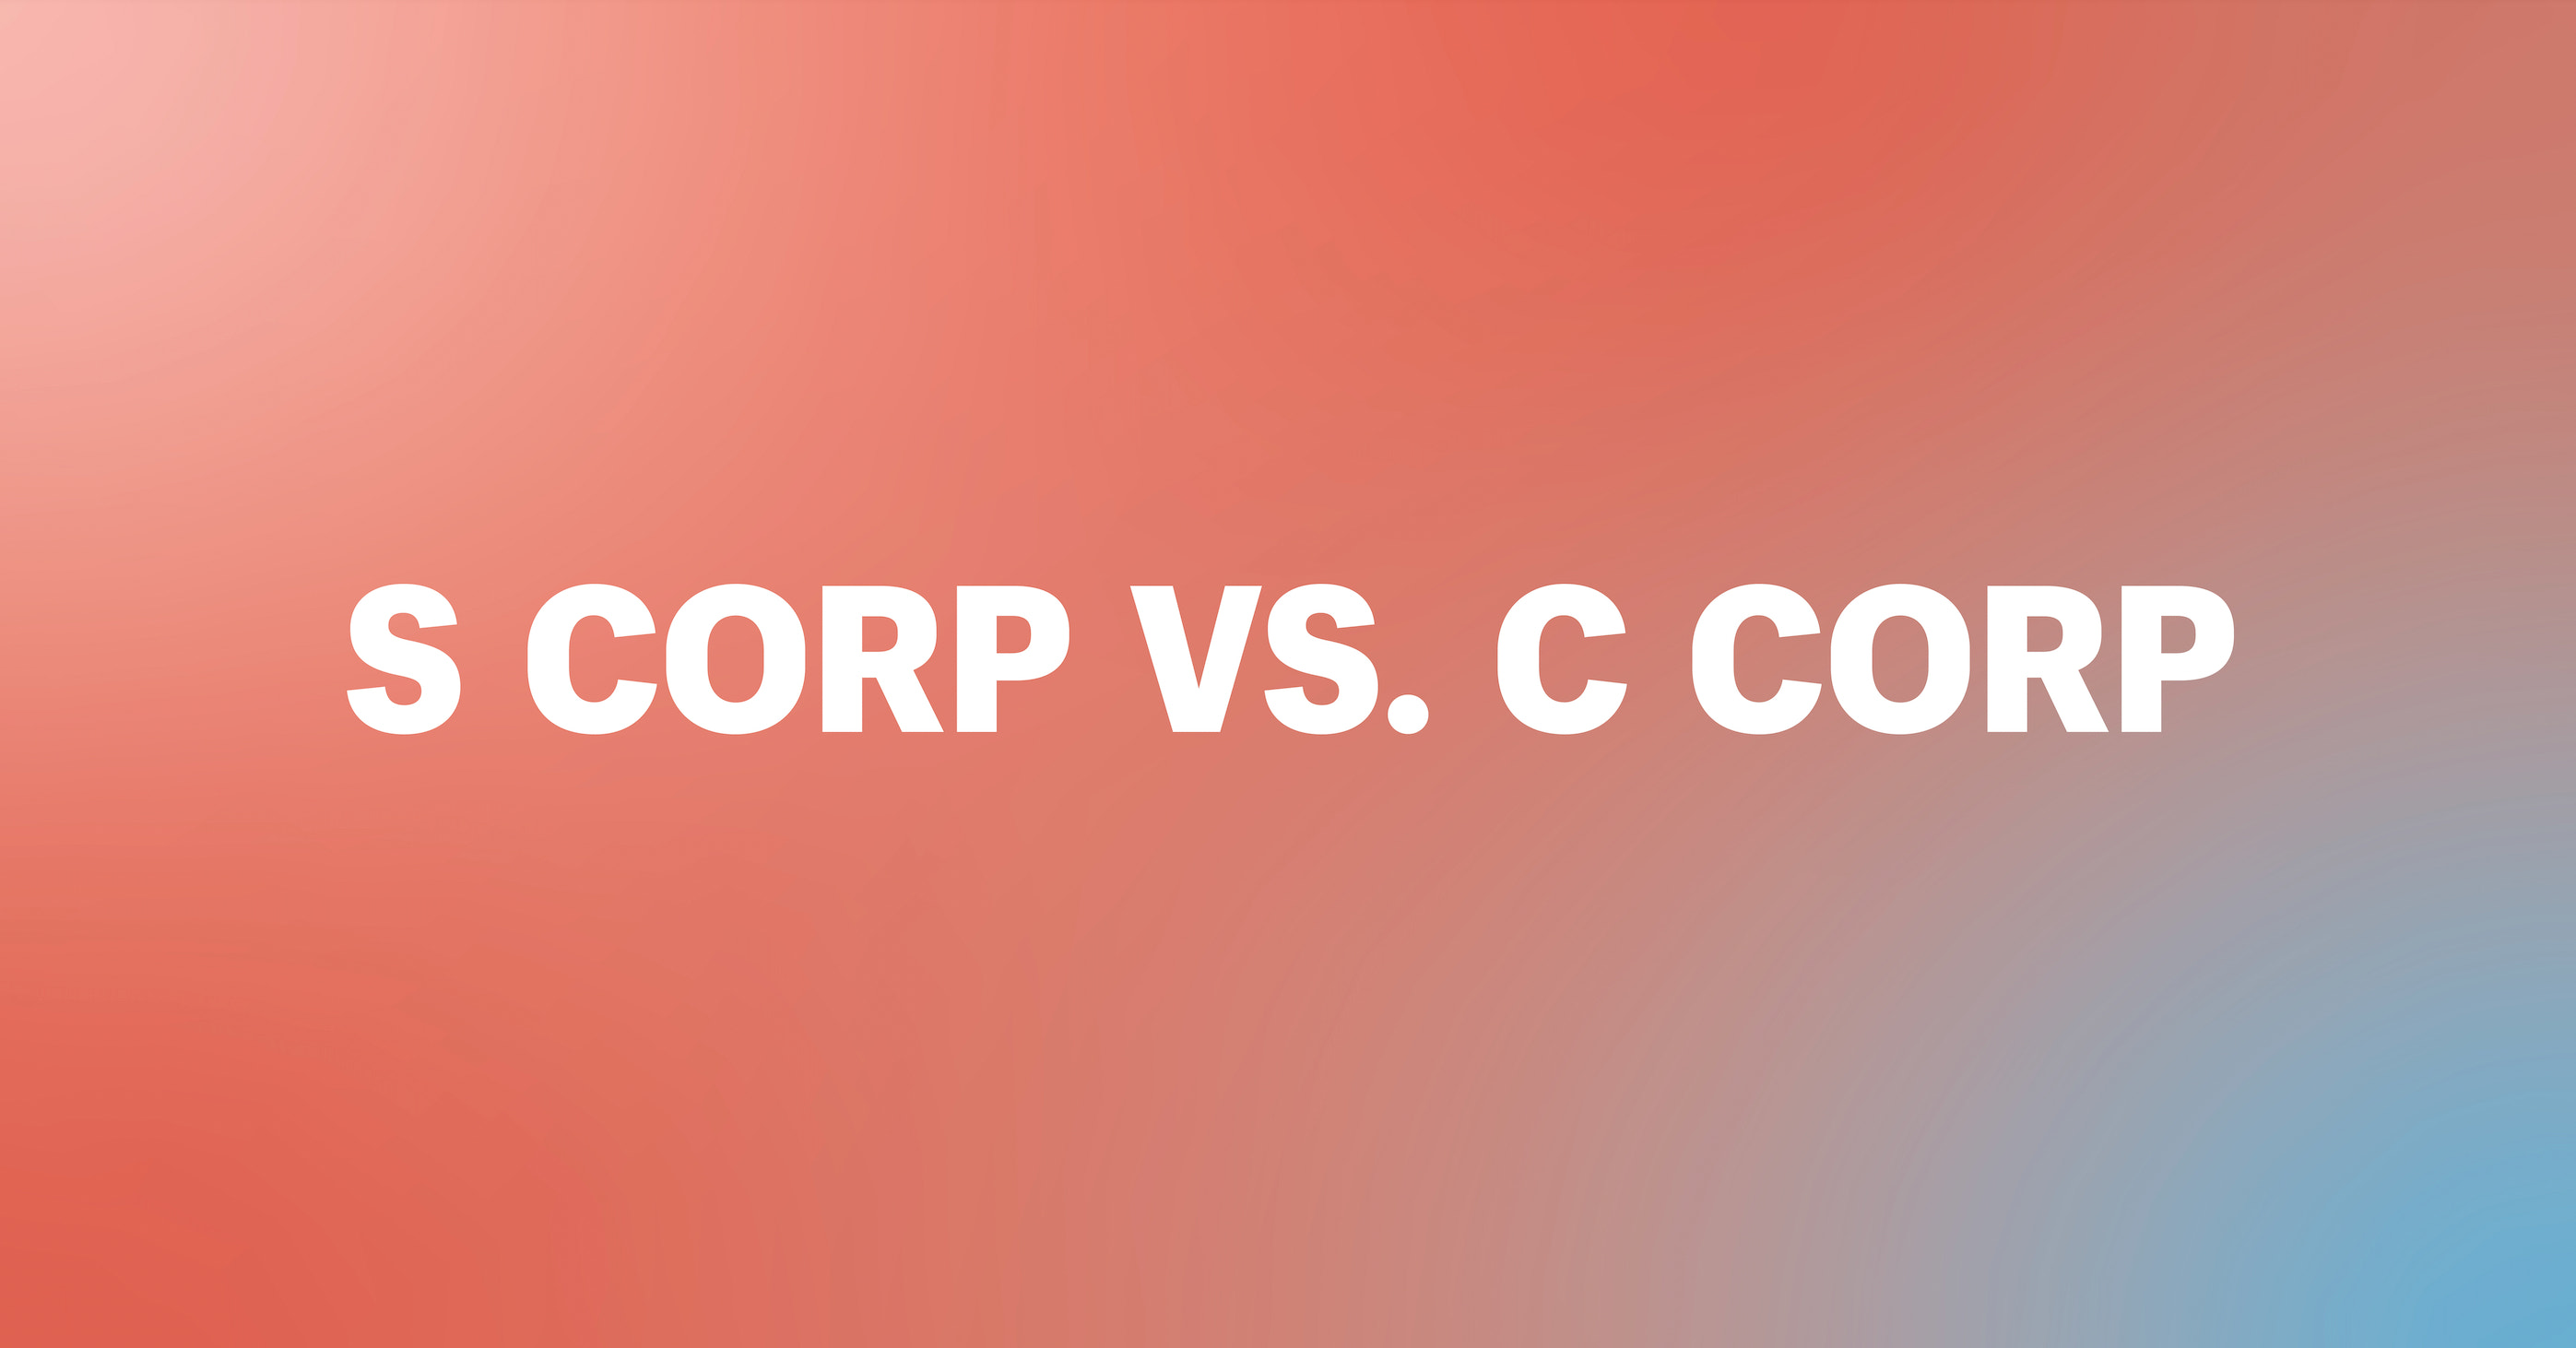 S Corp vs C Corp What is the difference? — Starting Up (2022)